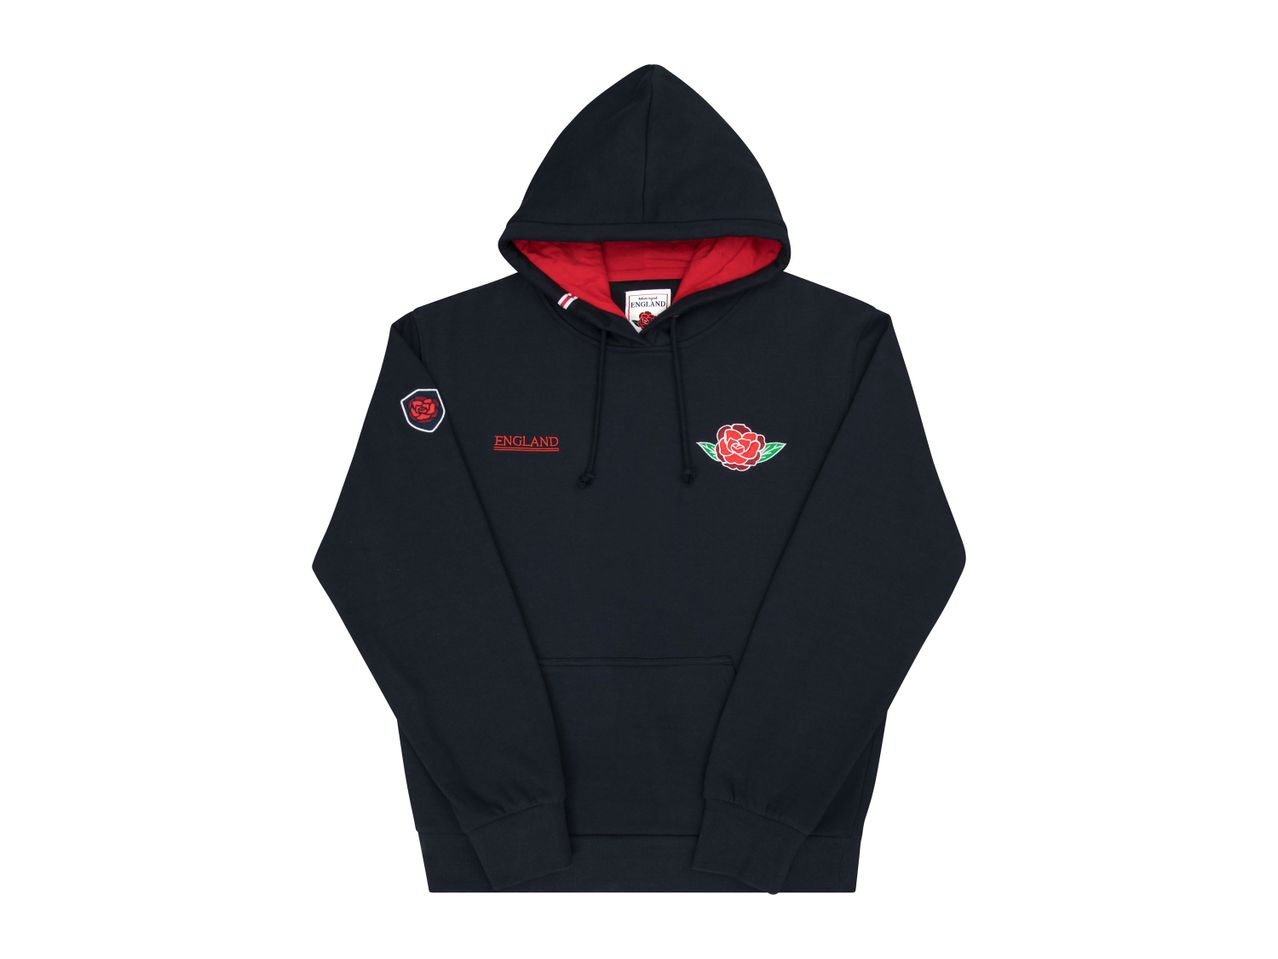 Go to full screen view: Adults’ England Rugby Hoodie - Image 2